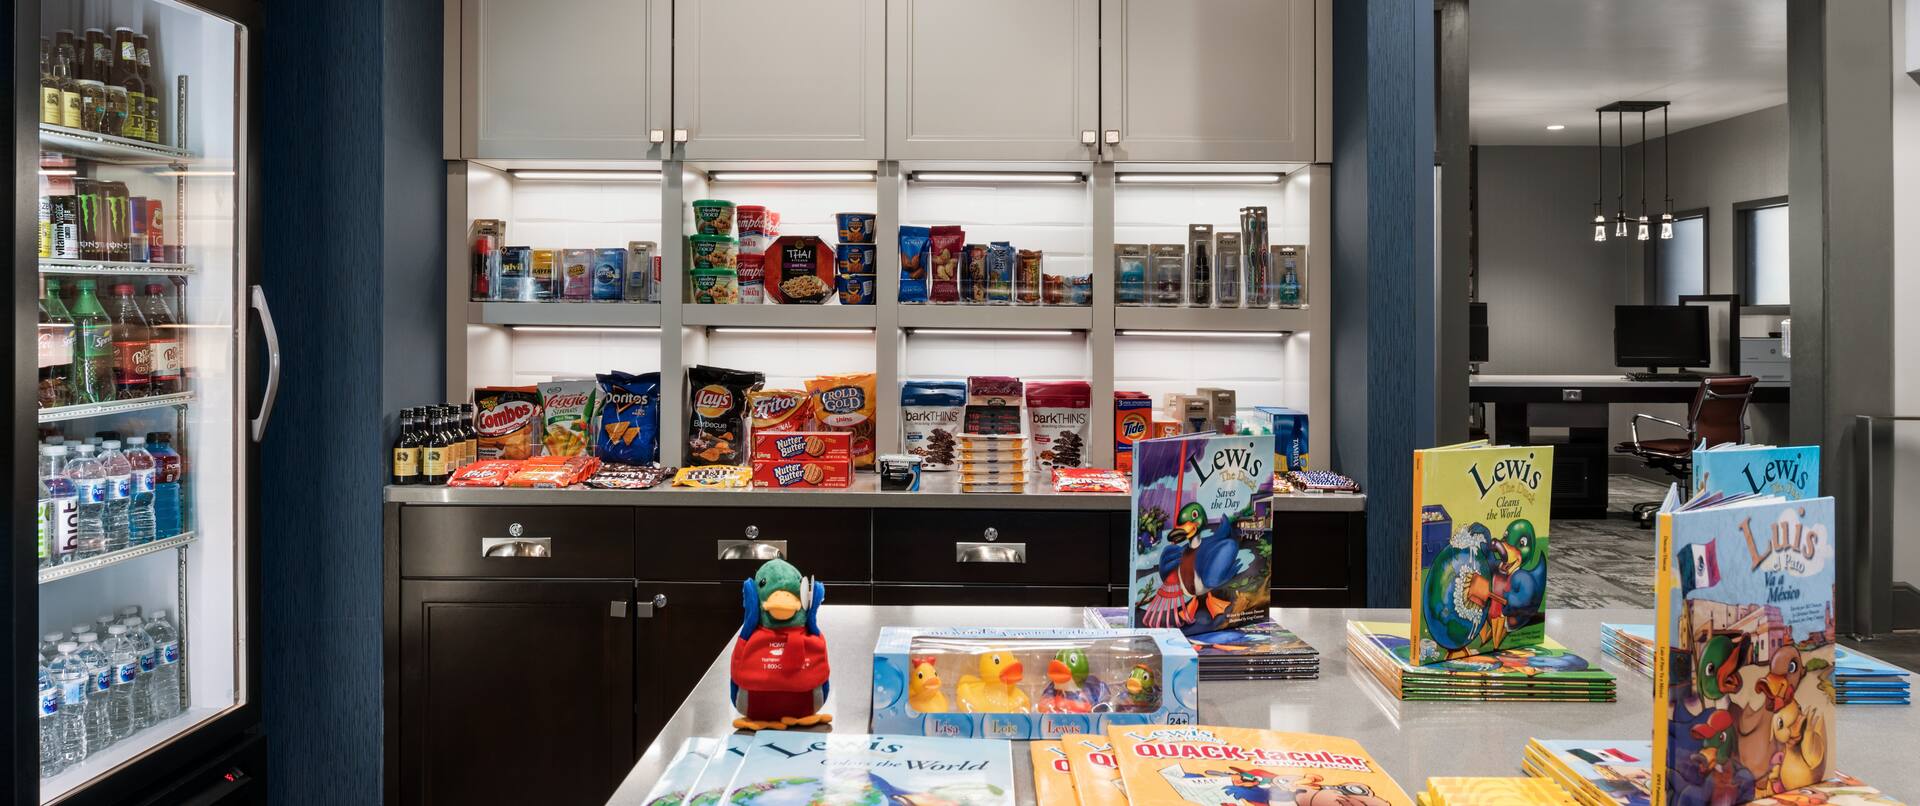 Suite Shop with Snacks, Beverages and Children's Books